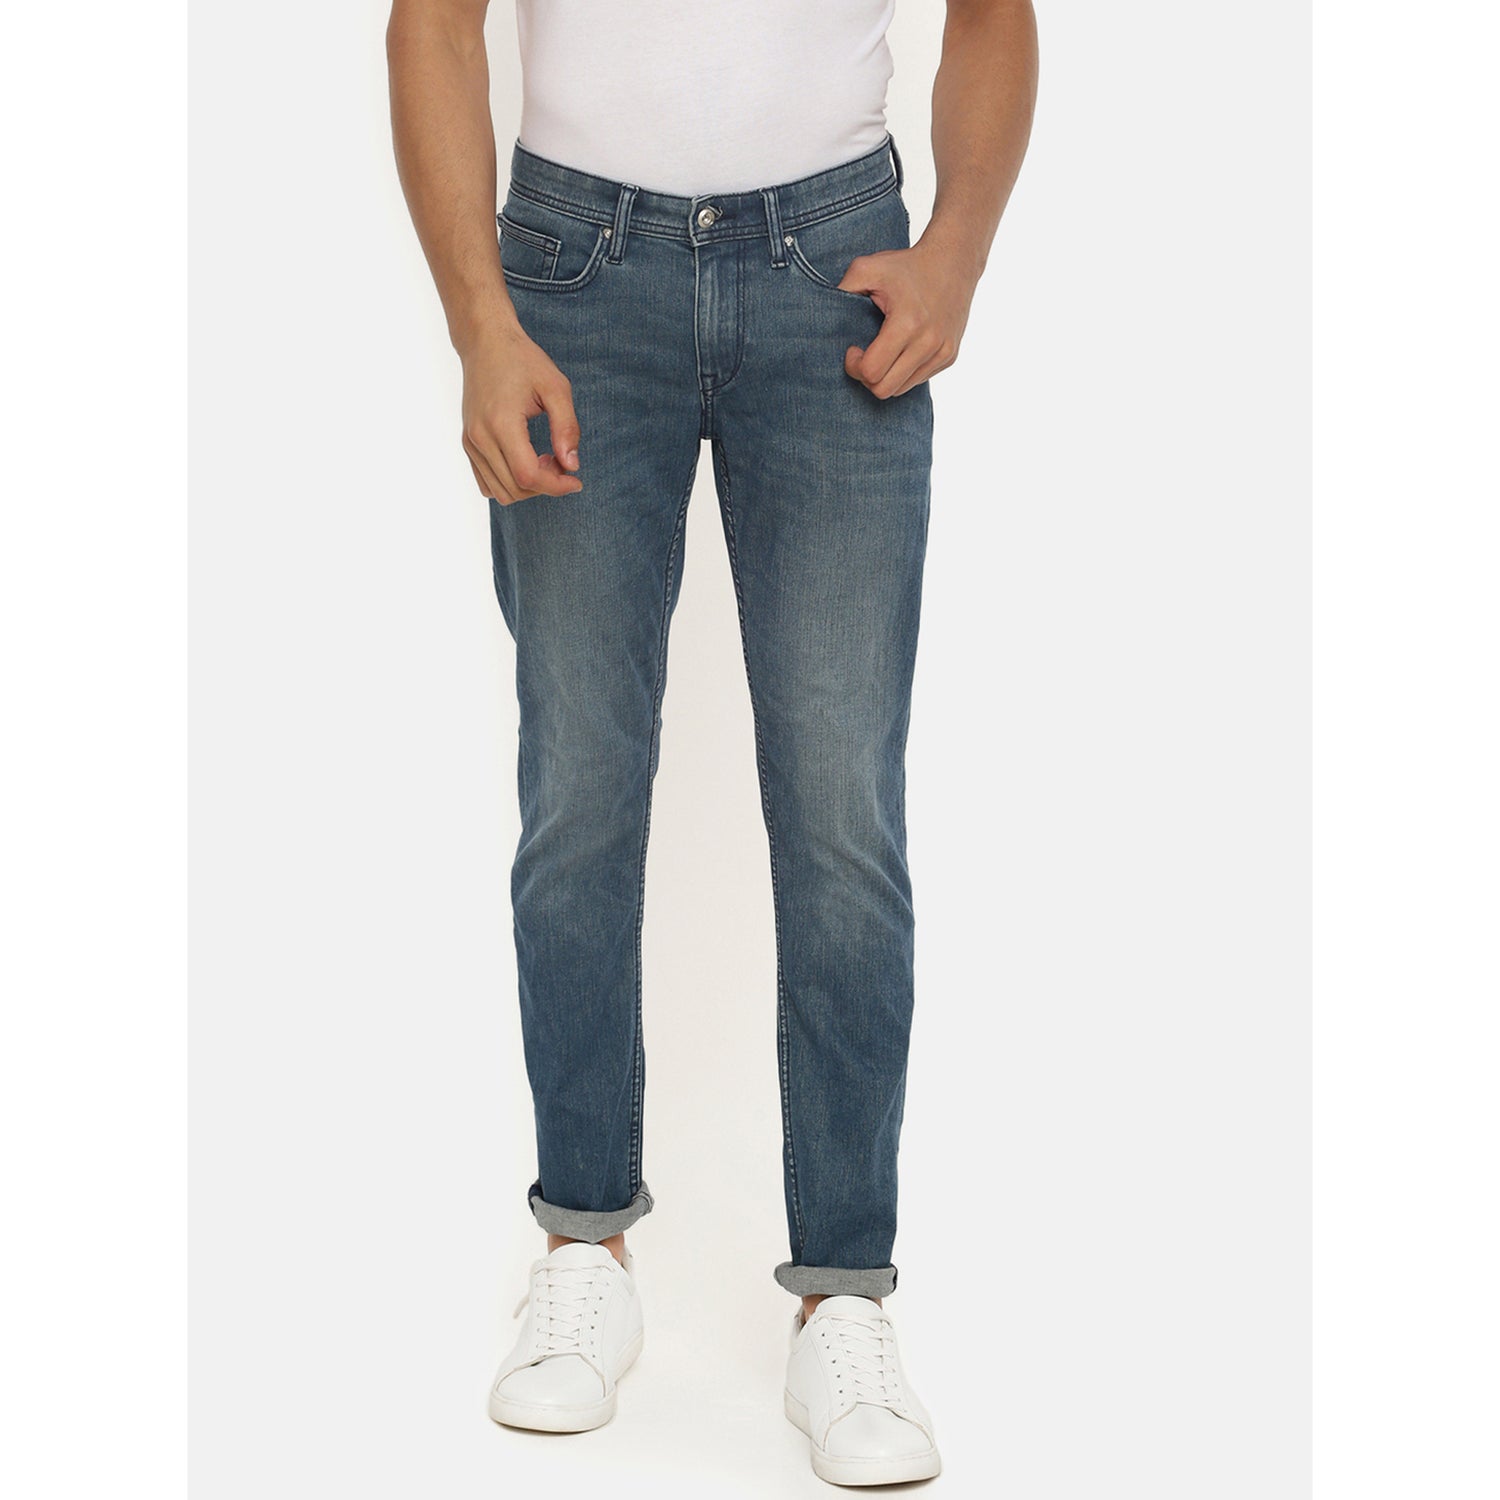 Blue Slim Fit Mid-Rise Clean Look Stretchable Jeans (POWER25)